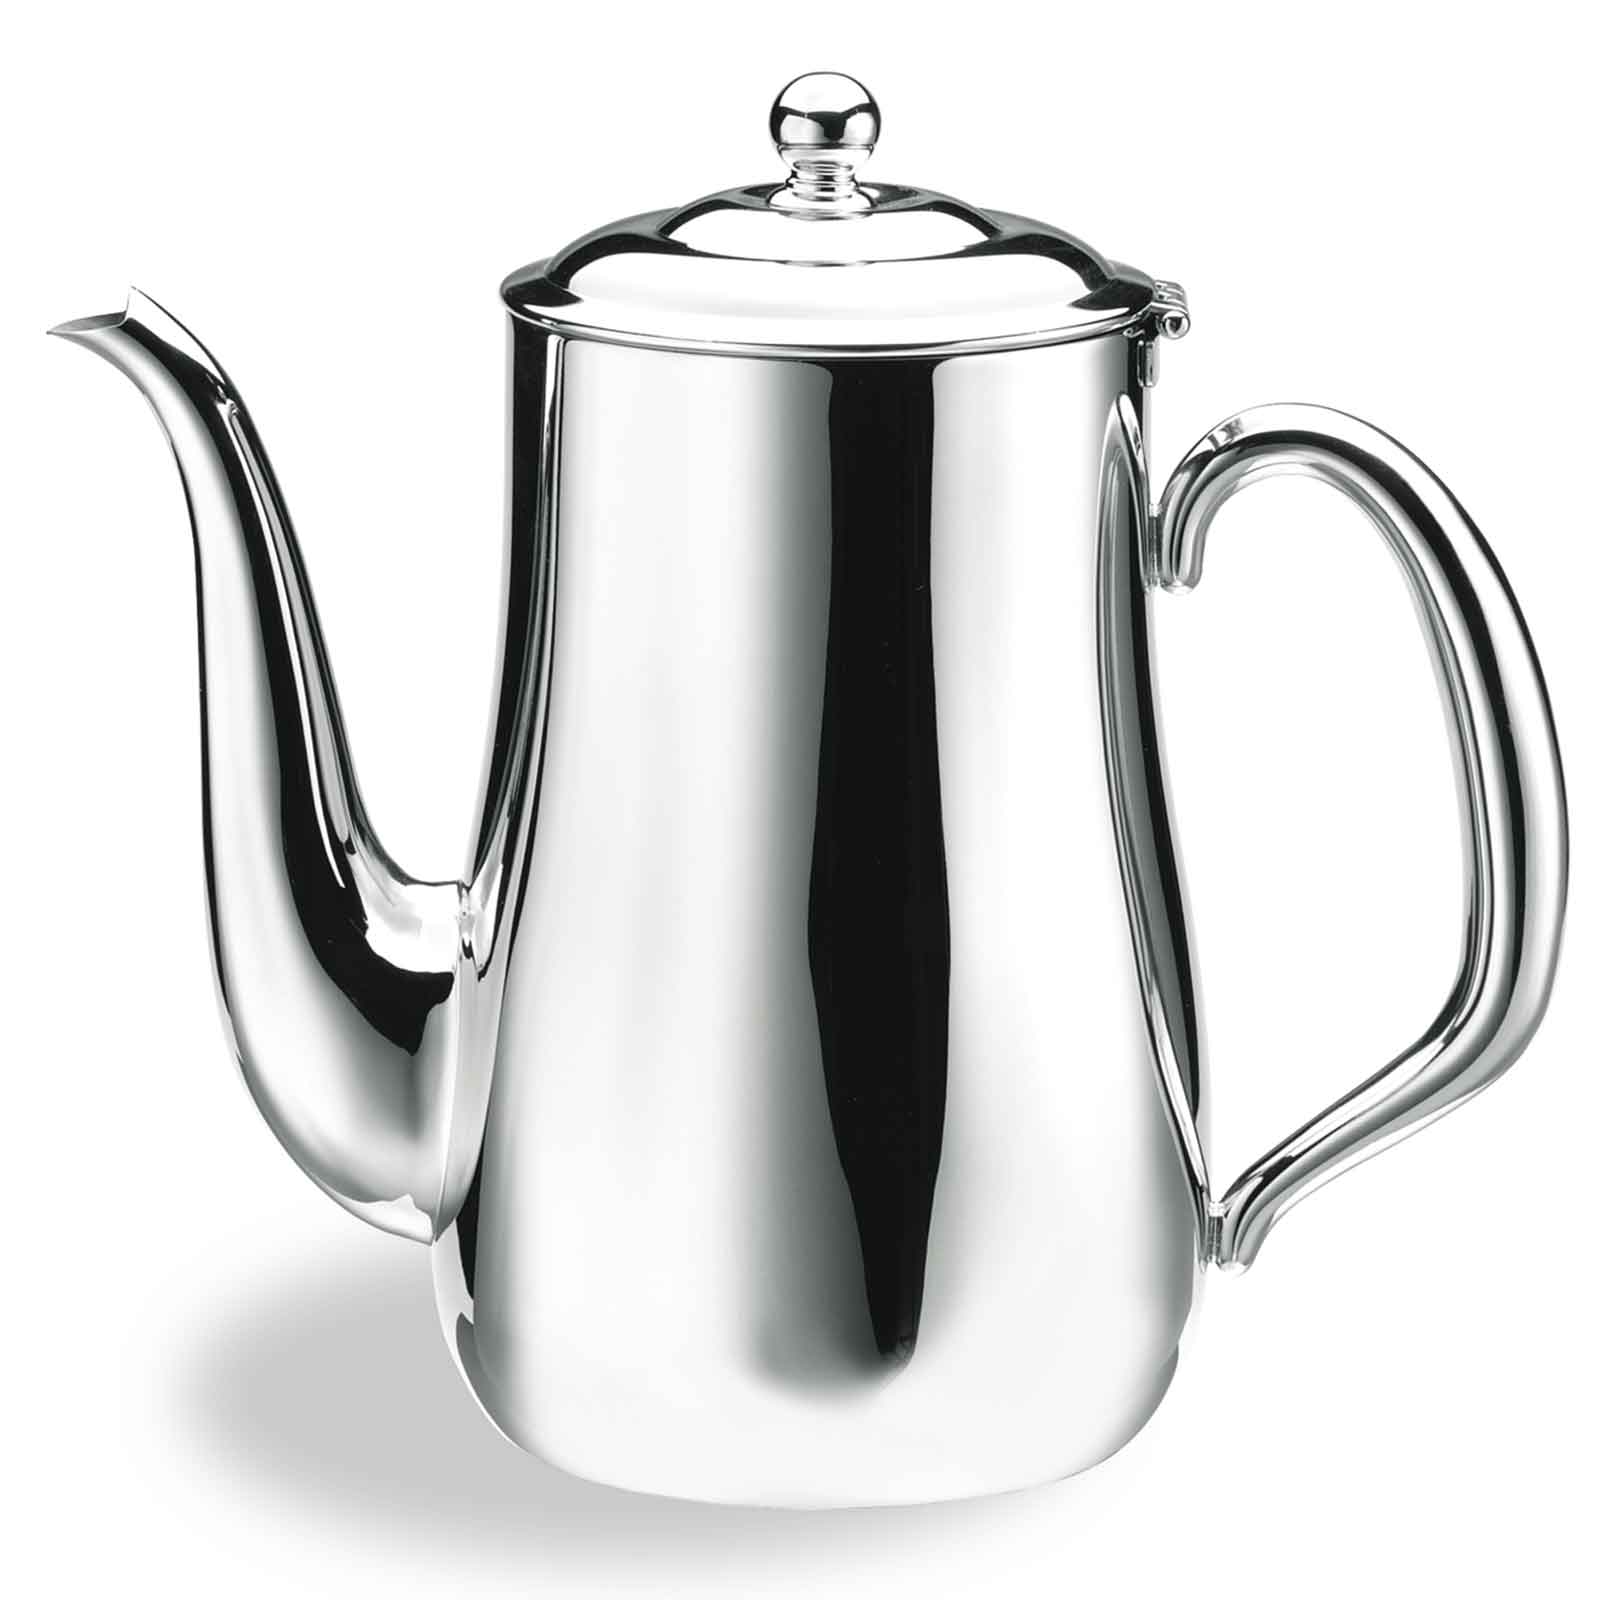 Walco Stainless CX515 Coffee Pot/Teapot, Stainless Steel, Holloware